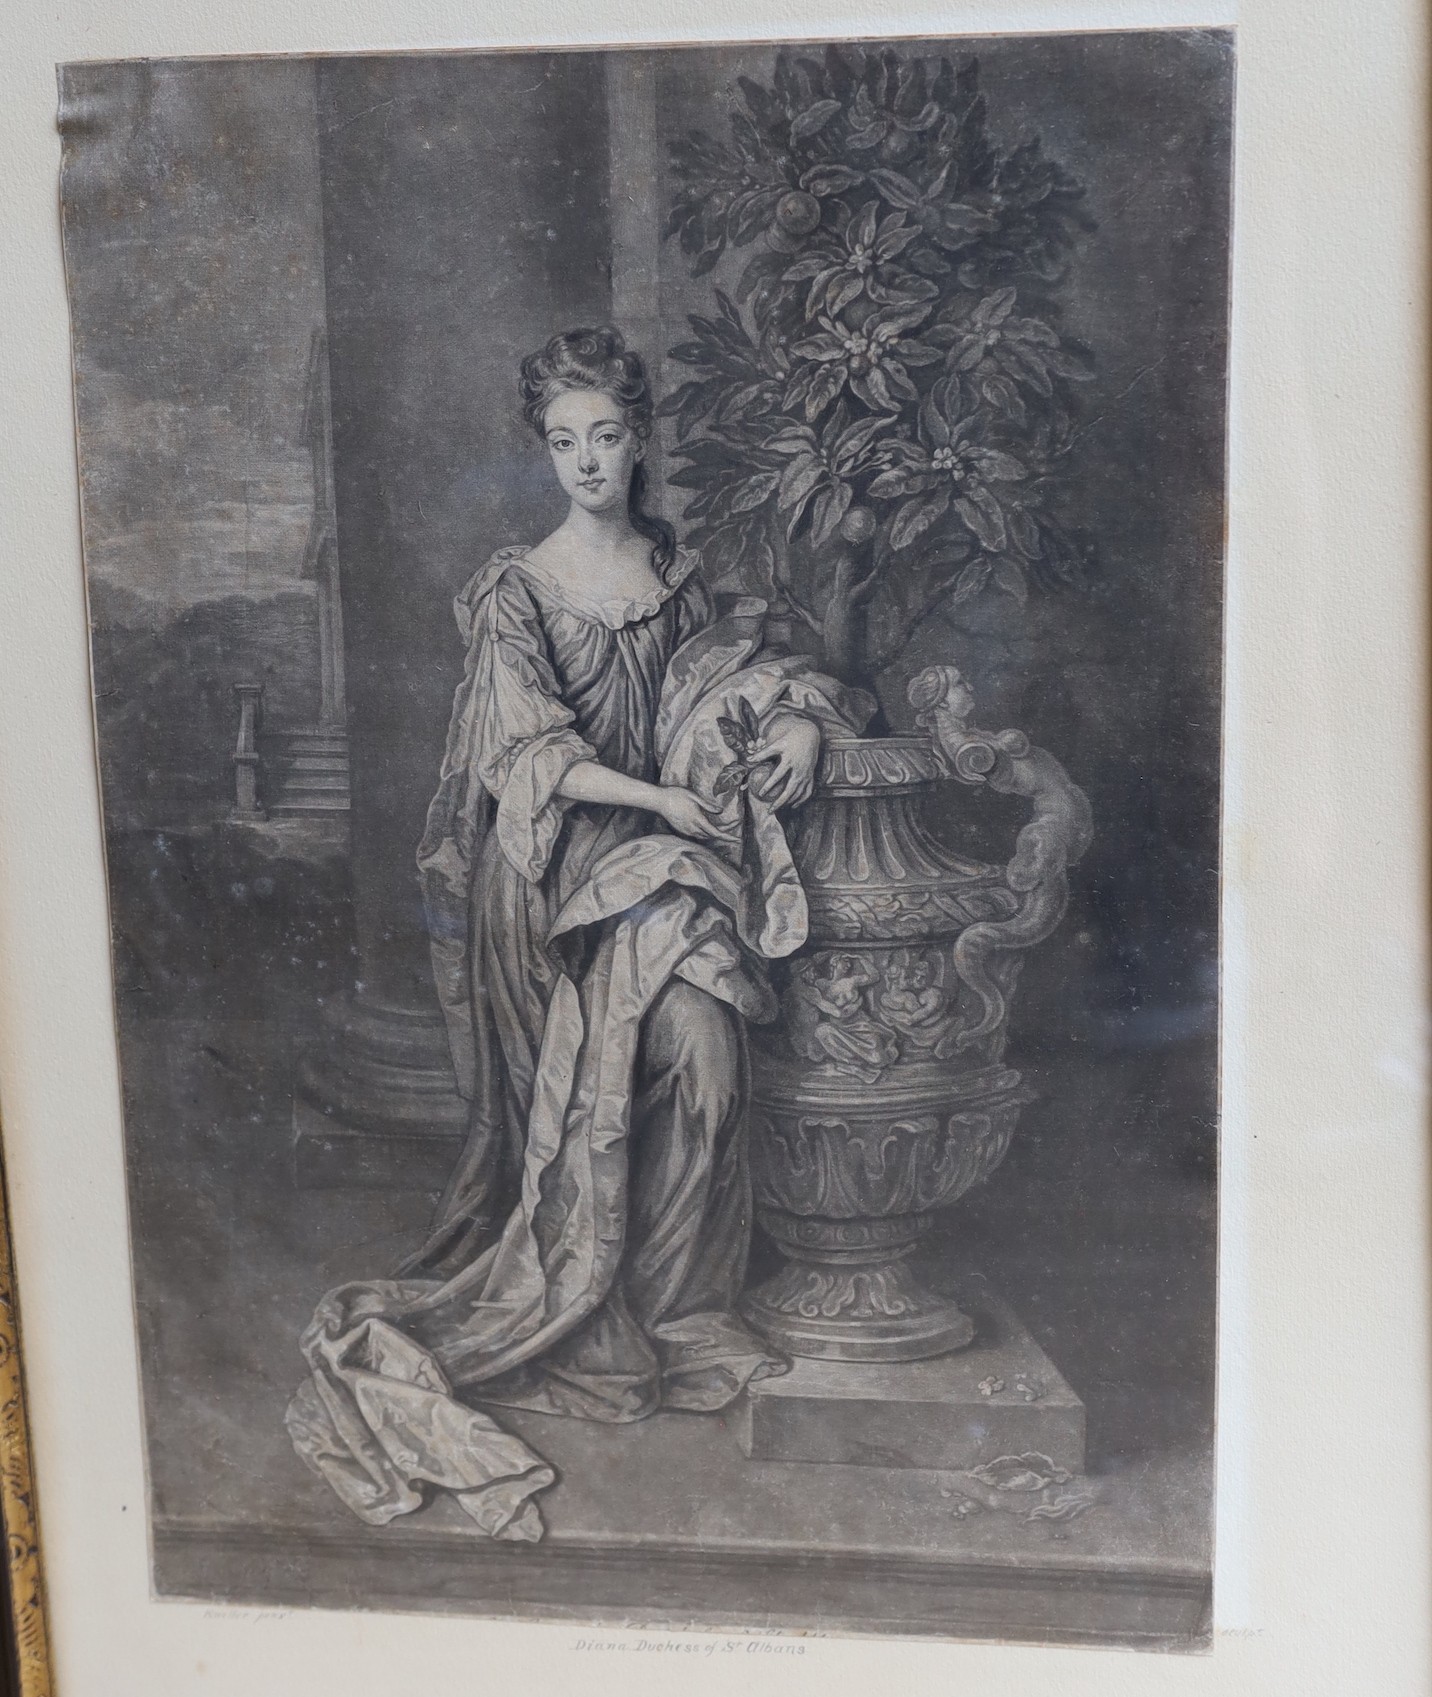 Two 18th century engravings of the Duke of Marlborough, after vander Werf, 63.5 cm x 42cm, and The Lord Aubrey Beauclerk engraved by G. Vertue, a lithograph of Charles II and a photogravure of Diana Duchess of St Albans